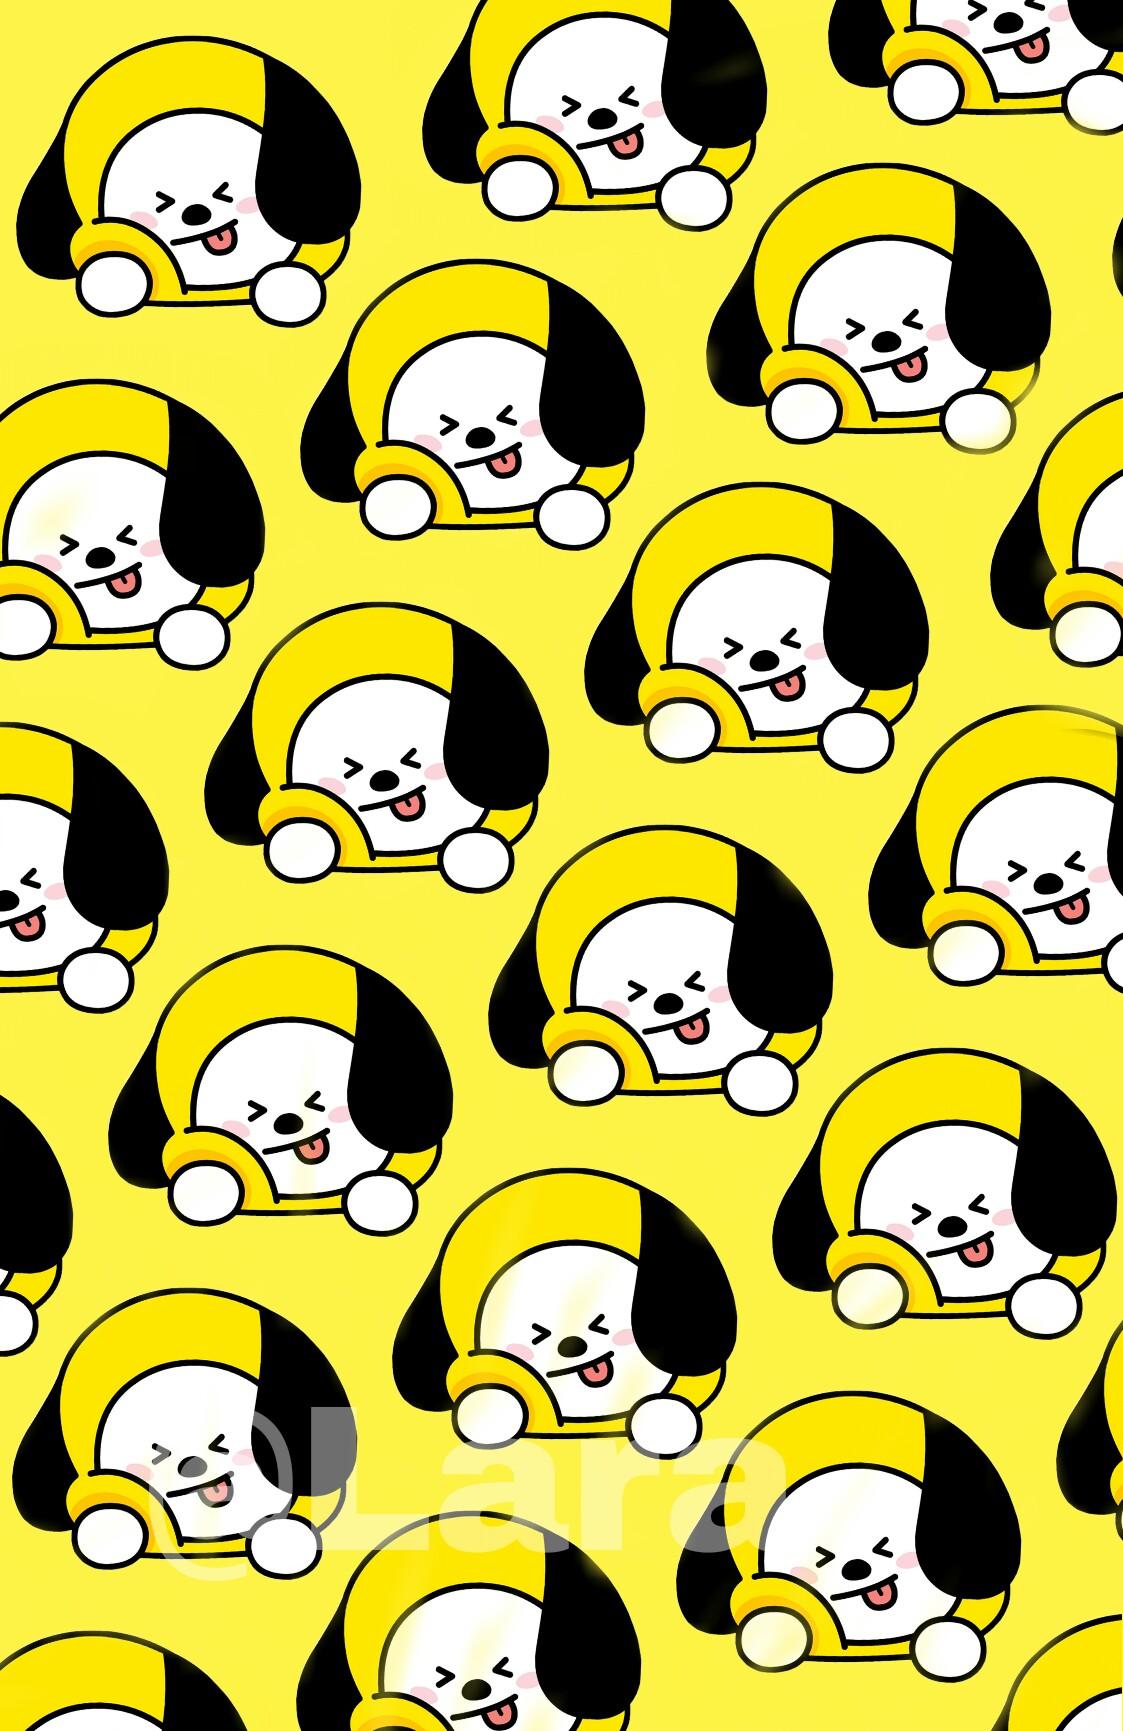 Bt21 Chimmy Wallpapers Wallpaper Cave The great collection of chimmy wallpapers for desktop, laptop and mobiles. bt21 chimmy wallpapers wallpaper cave